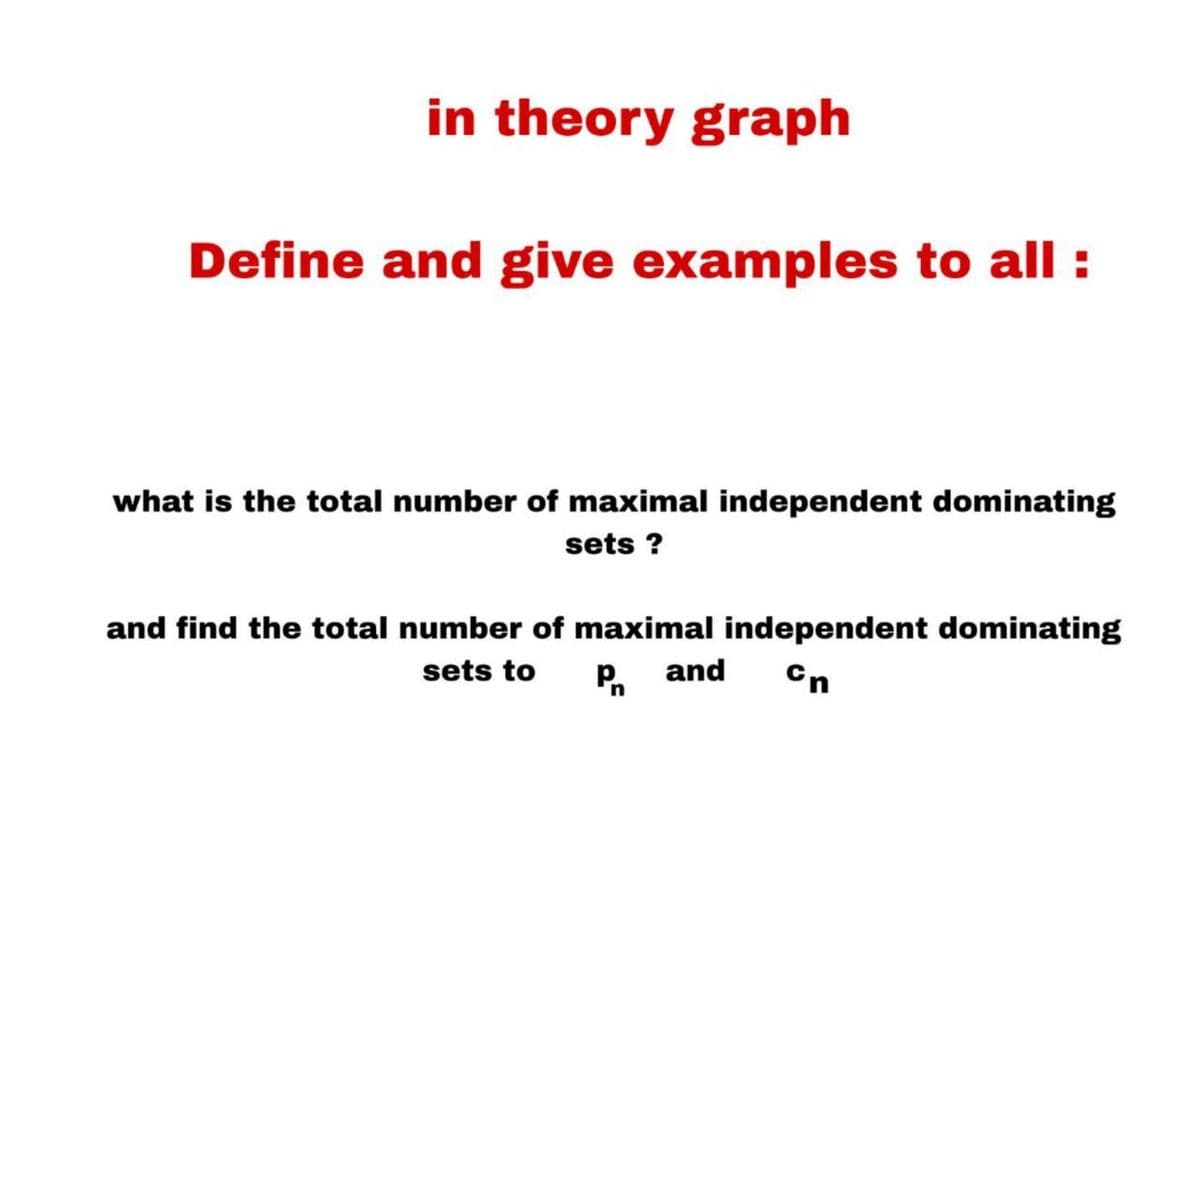 in theory graph
Define and give examples to all :
what is the total number of maximal independent dominating
sets ?
and find the total number of maximal independent dominating
Cn
sets to
Pand